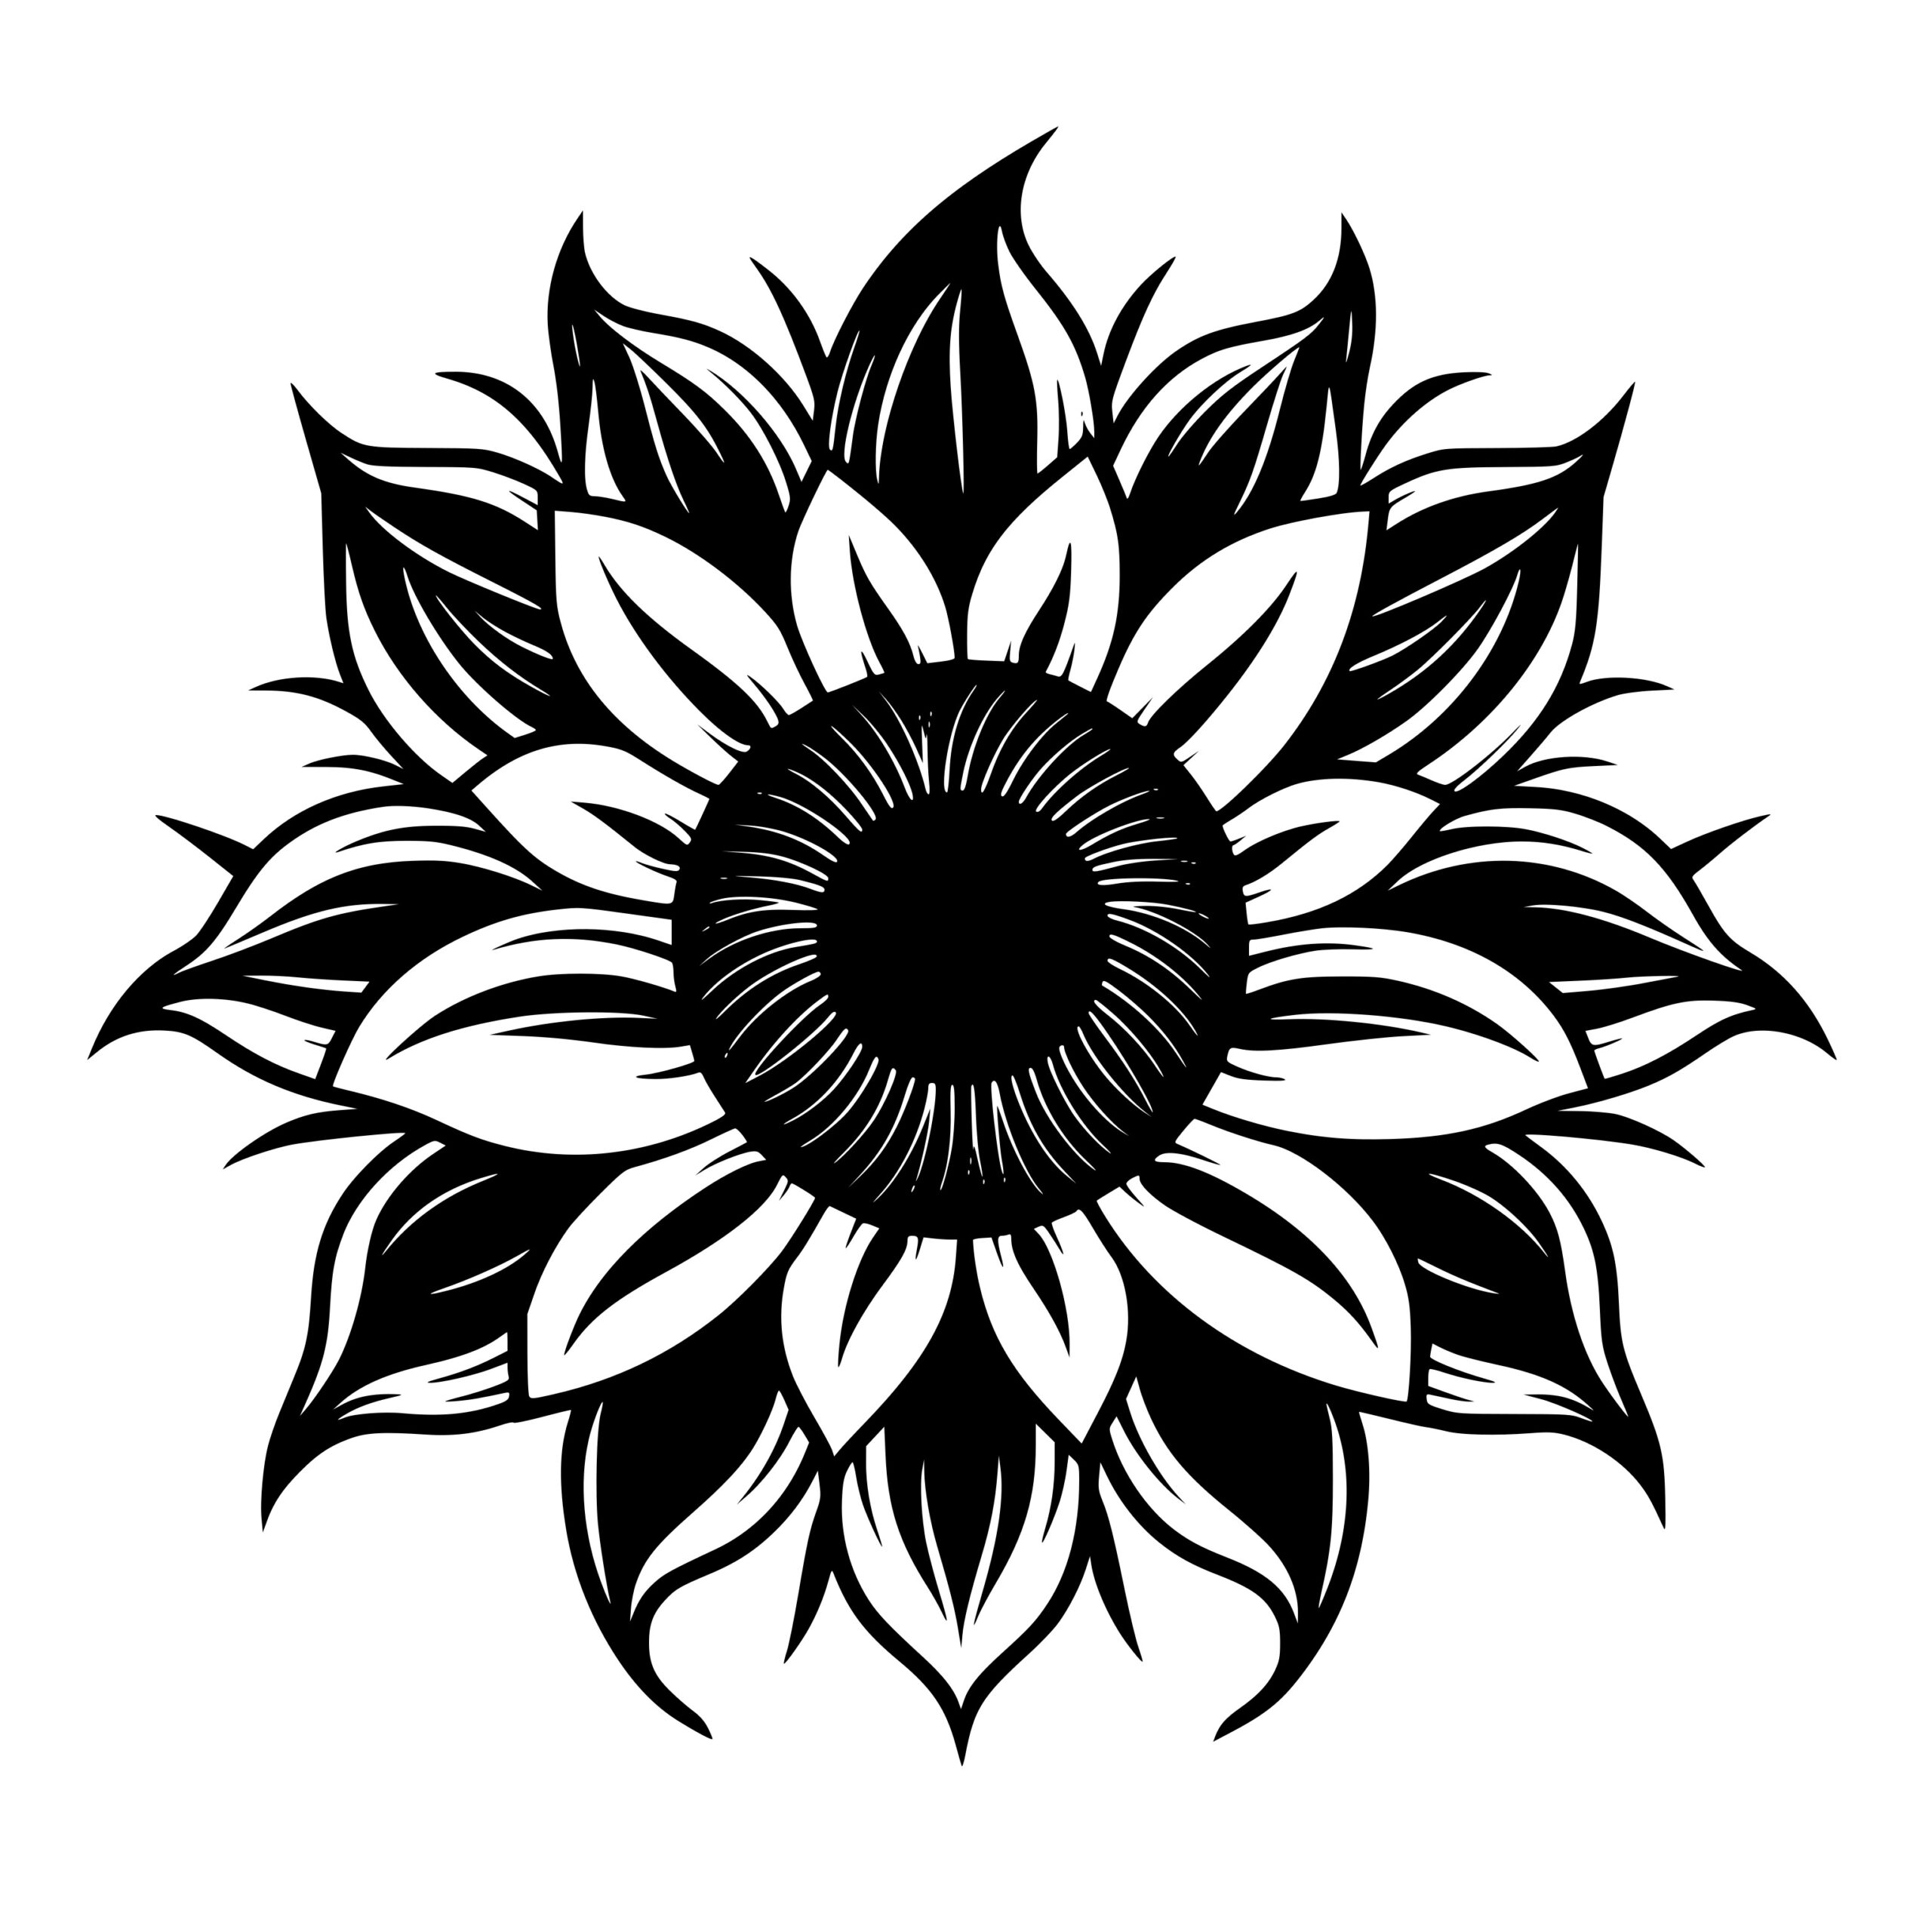 Floral Beauty SVG PNG DXF Image for Cricut, Silhouette, and Laser Machines